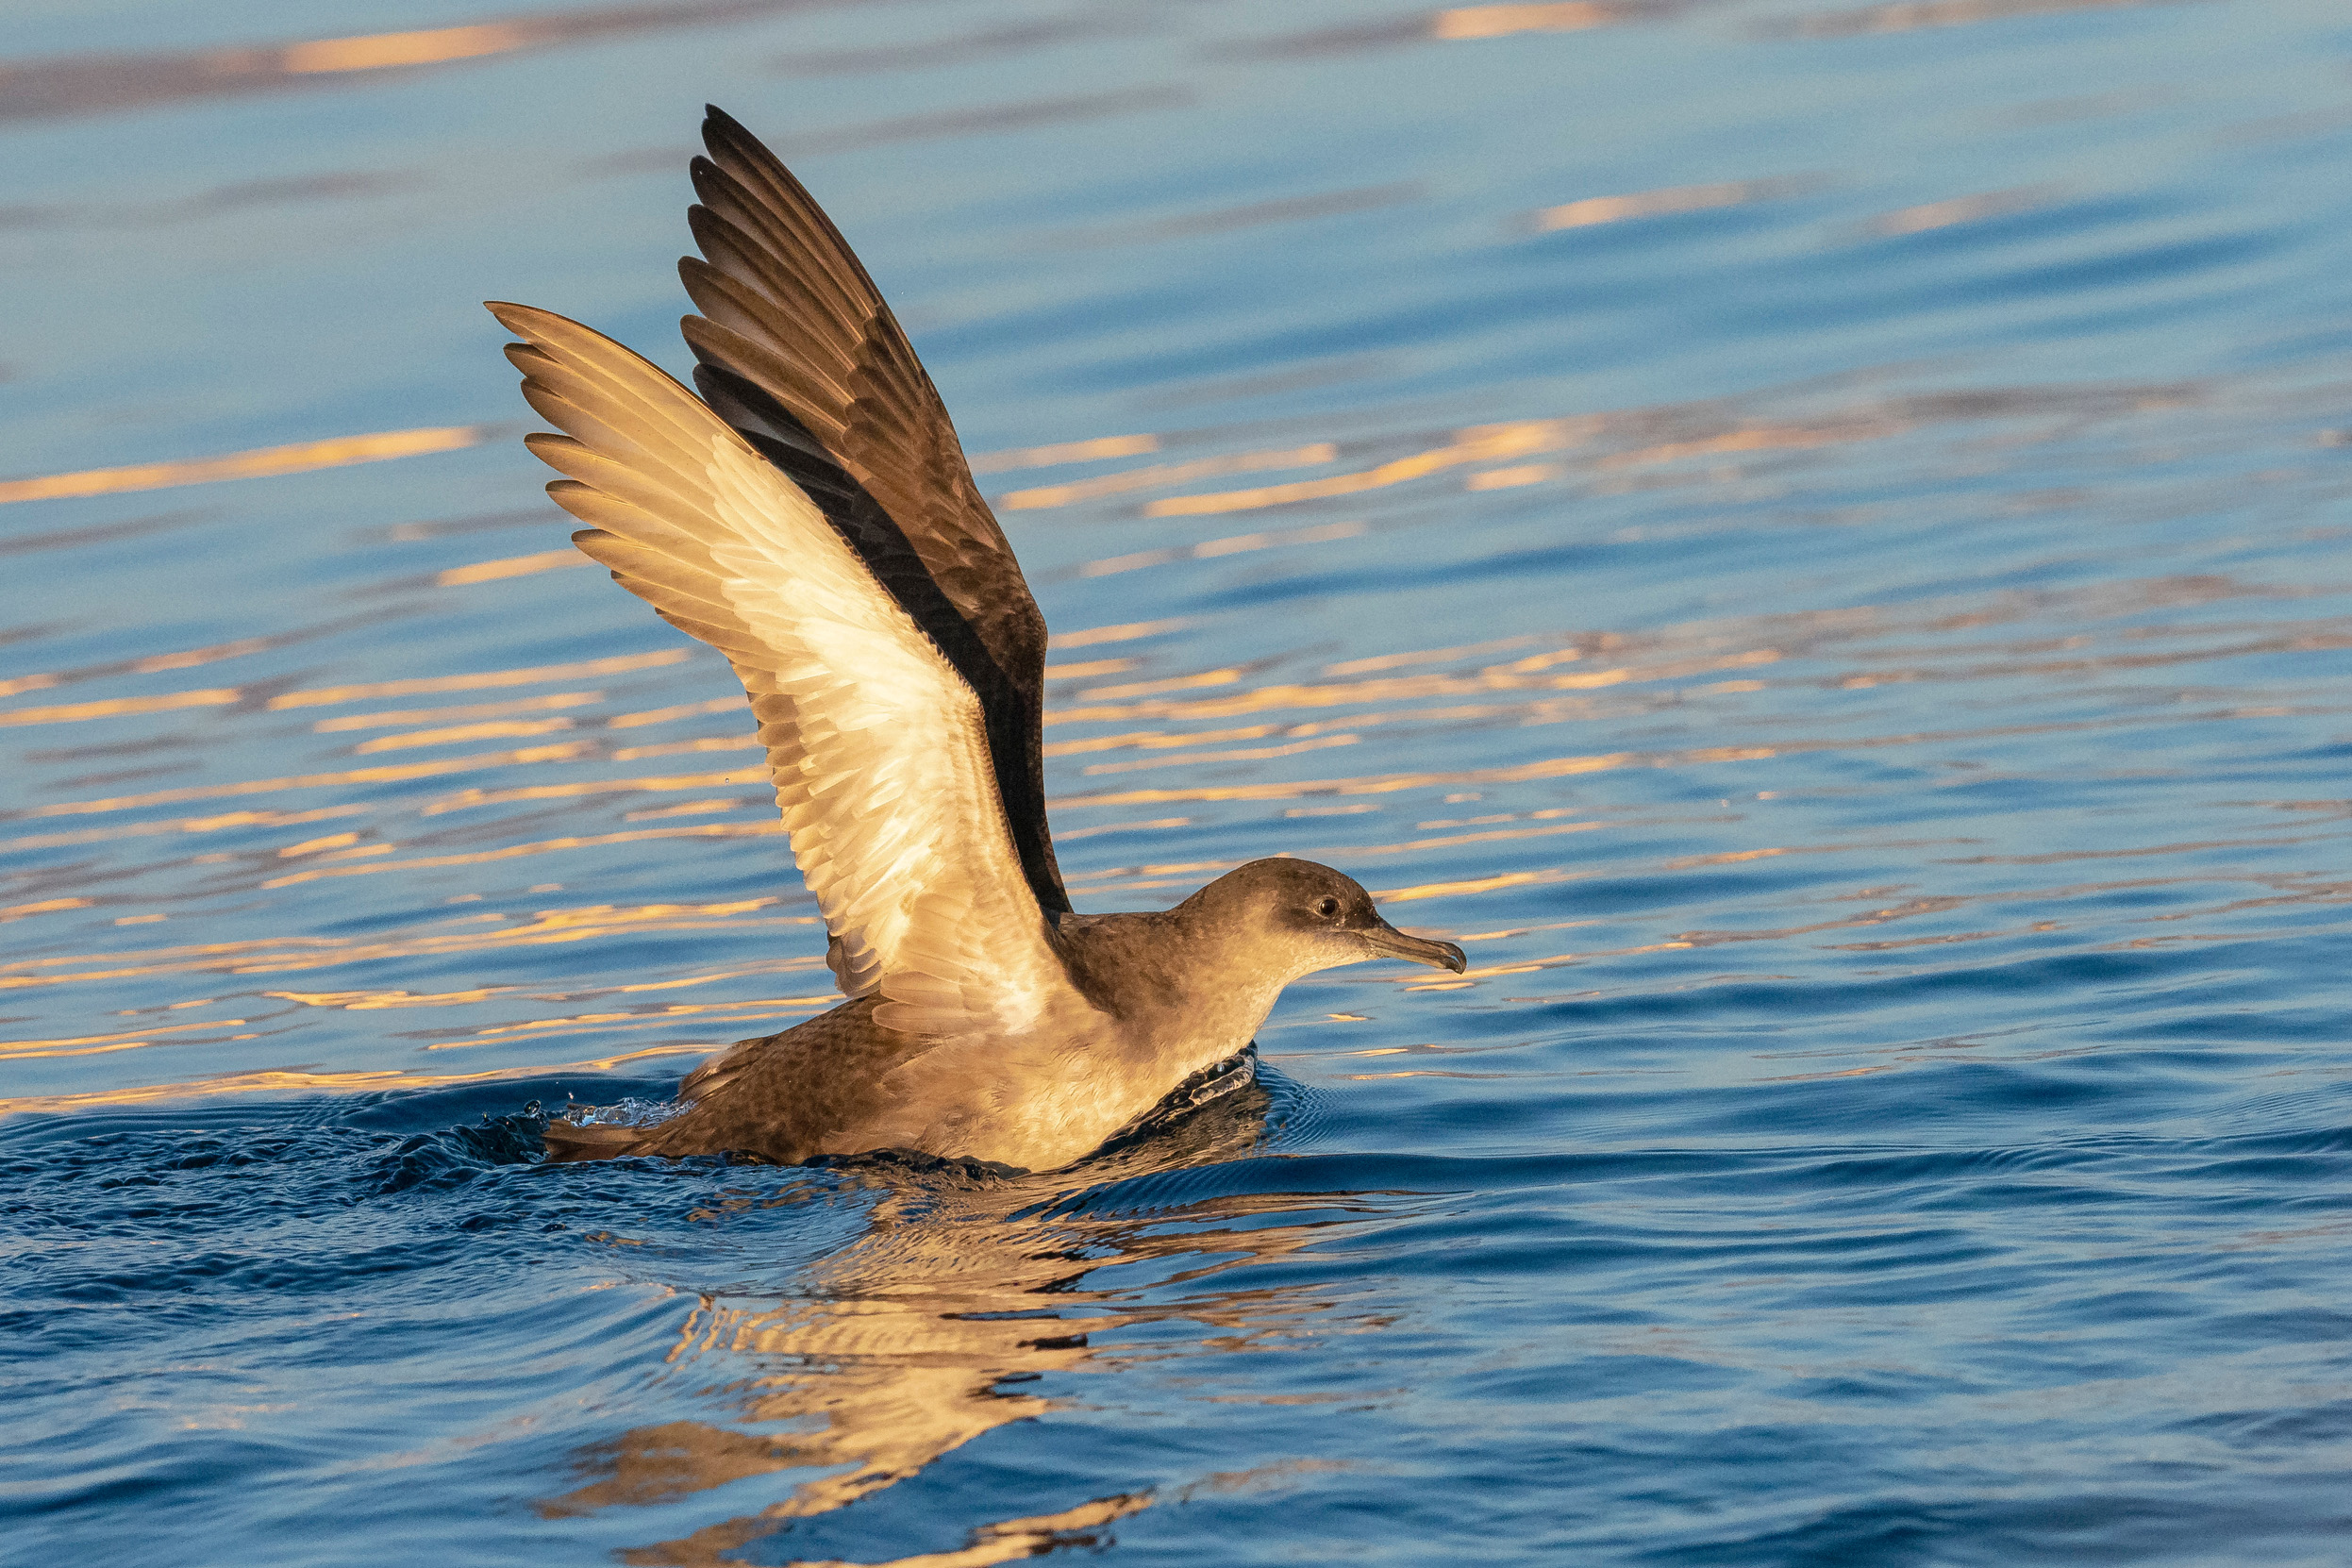 Balearic Shearwater taking off from a body of water at sunset.